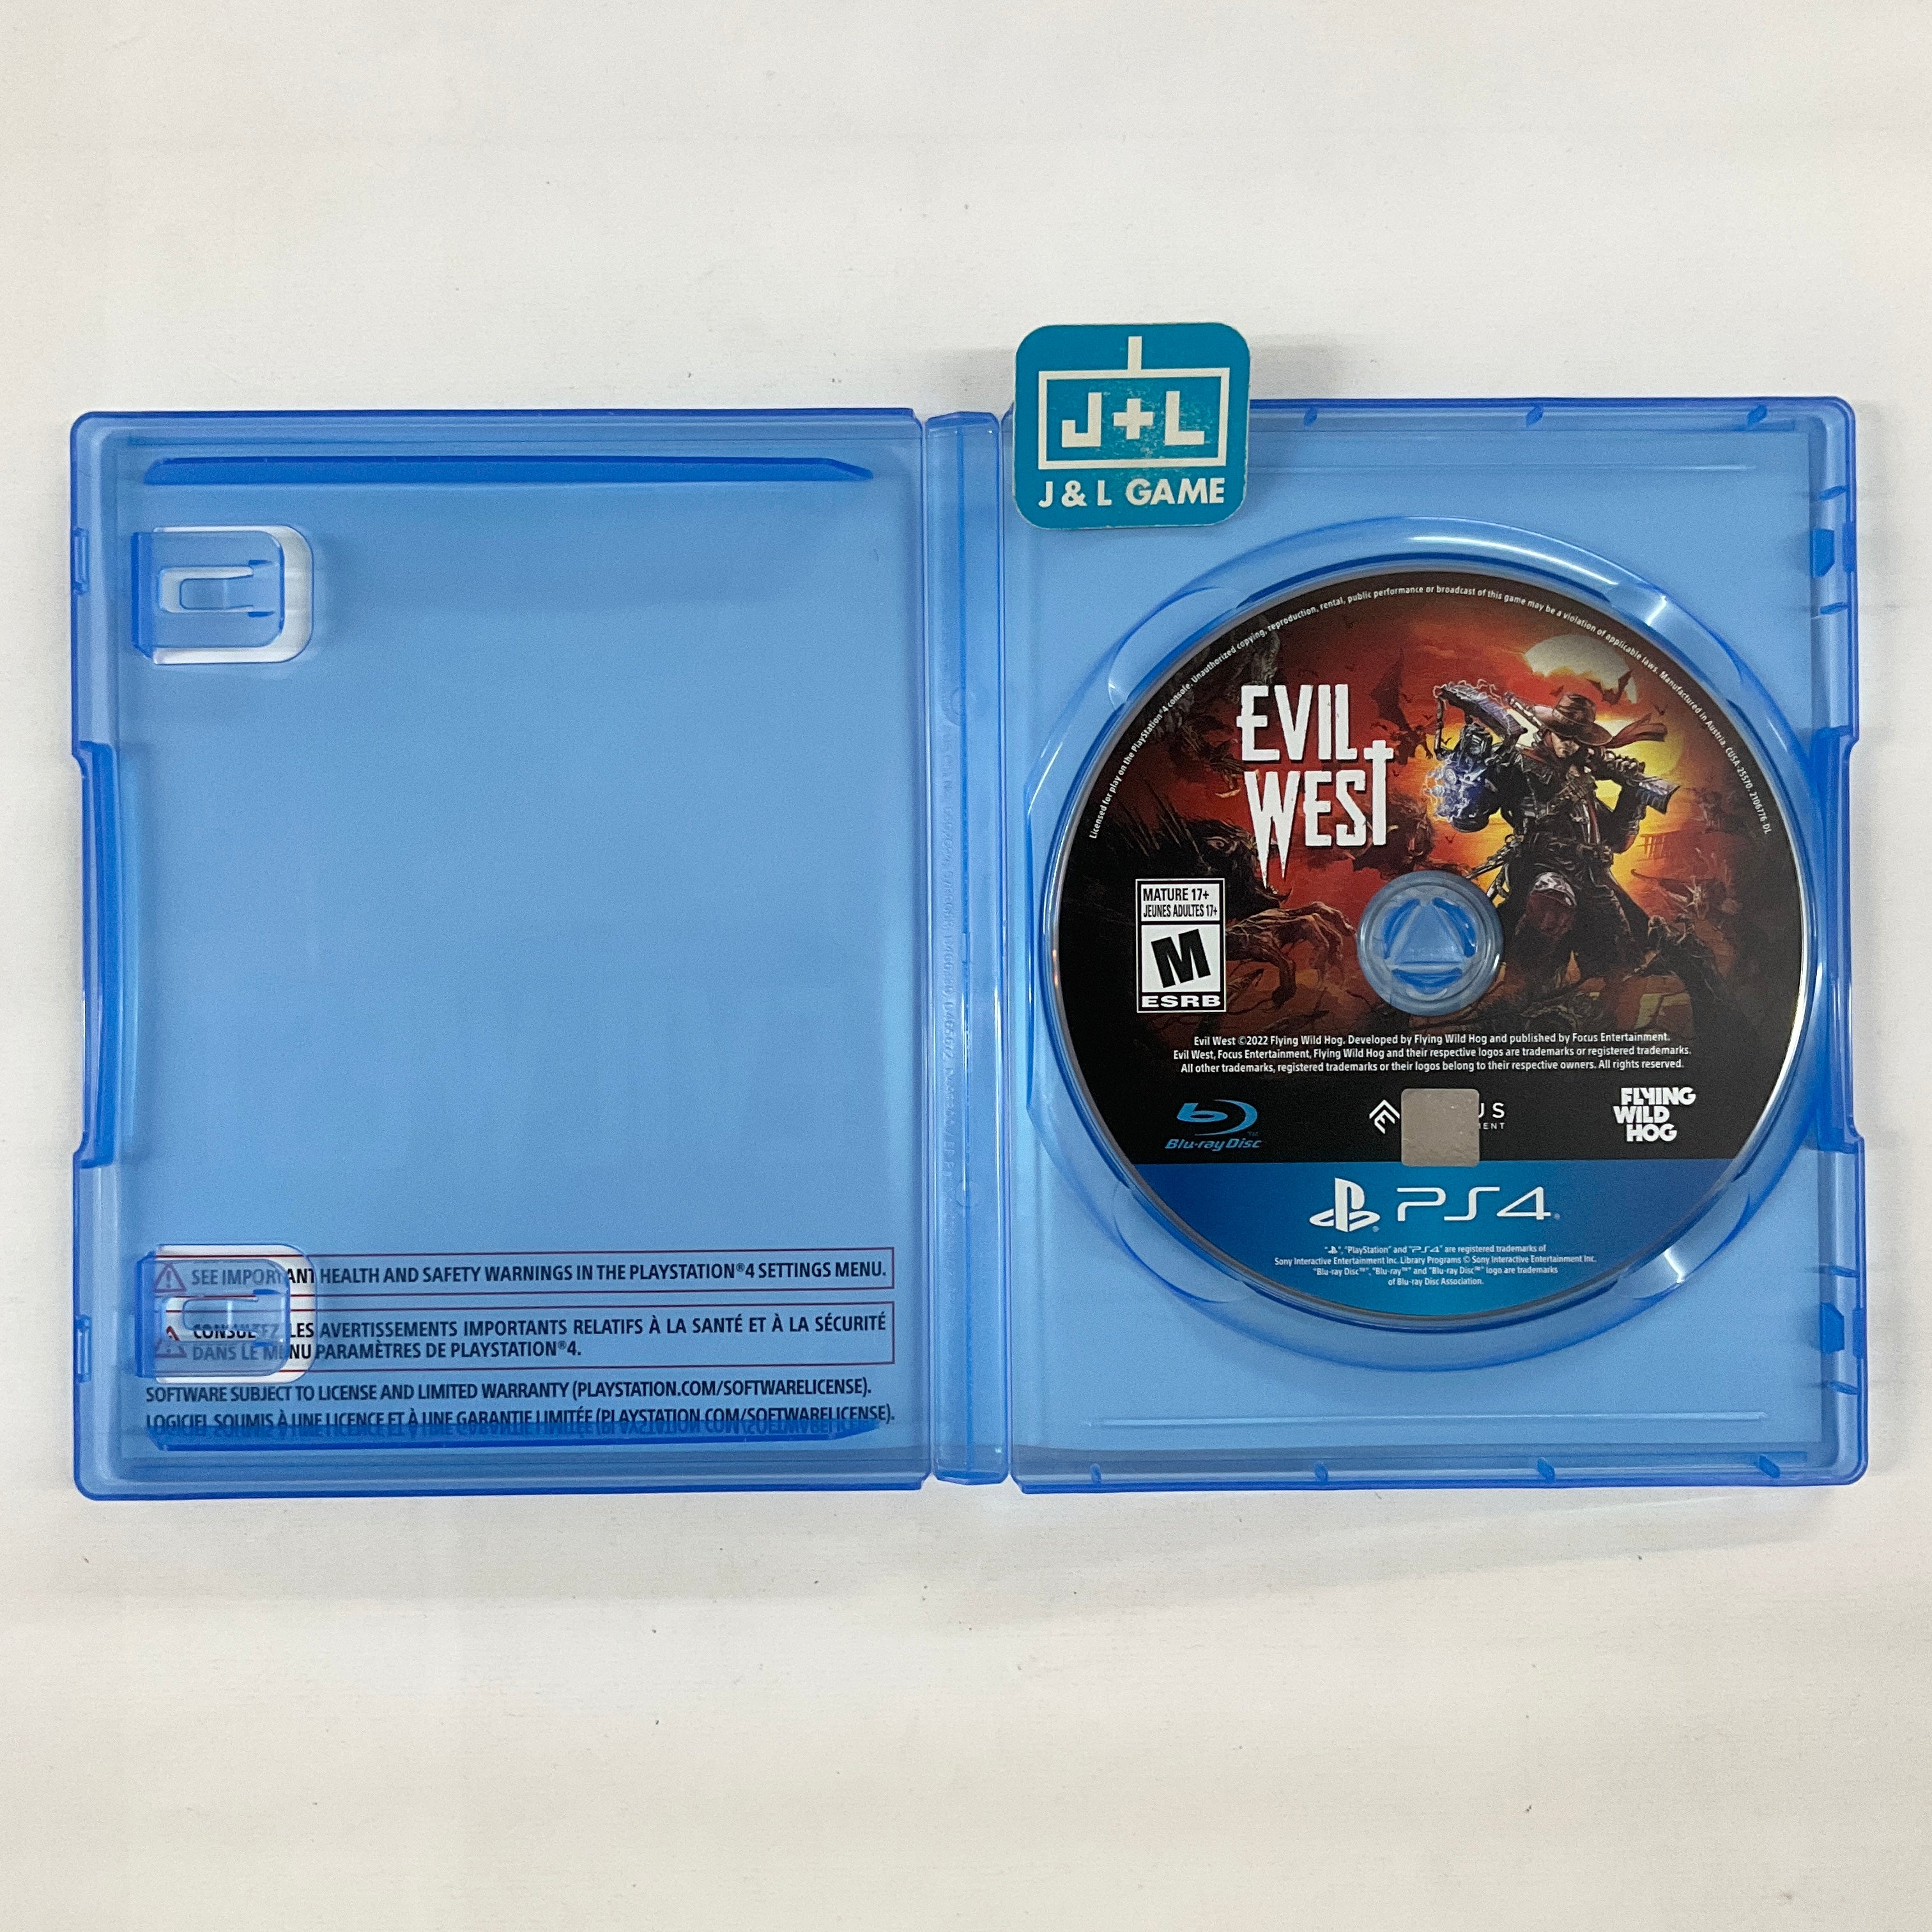 Evil West - (PS4) PlayStation 4 [Pre-Owned] Video Games Focus Home Interactive   